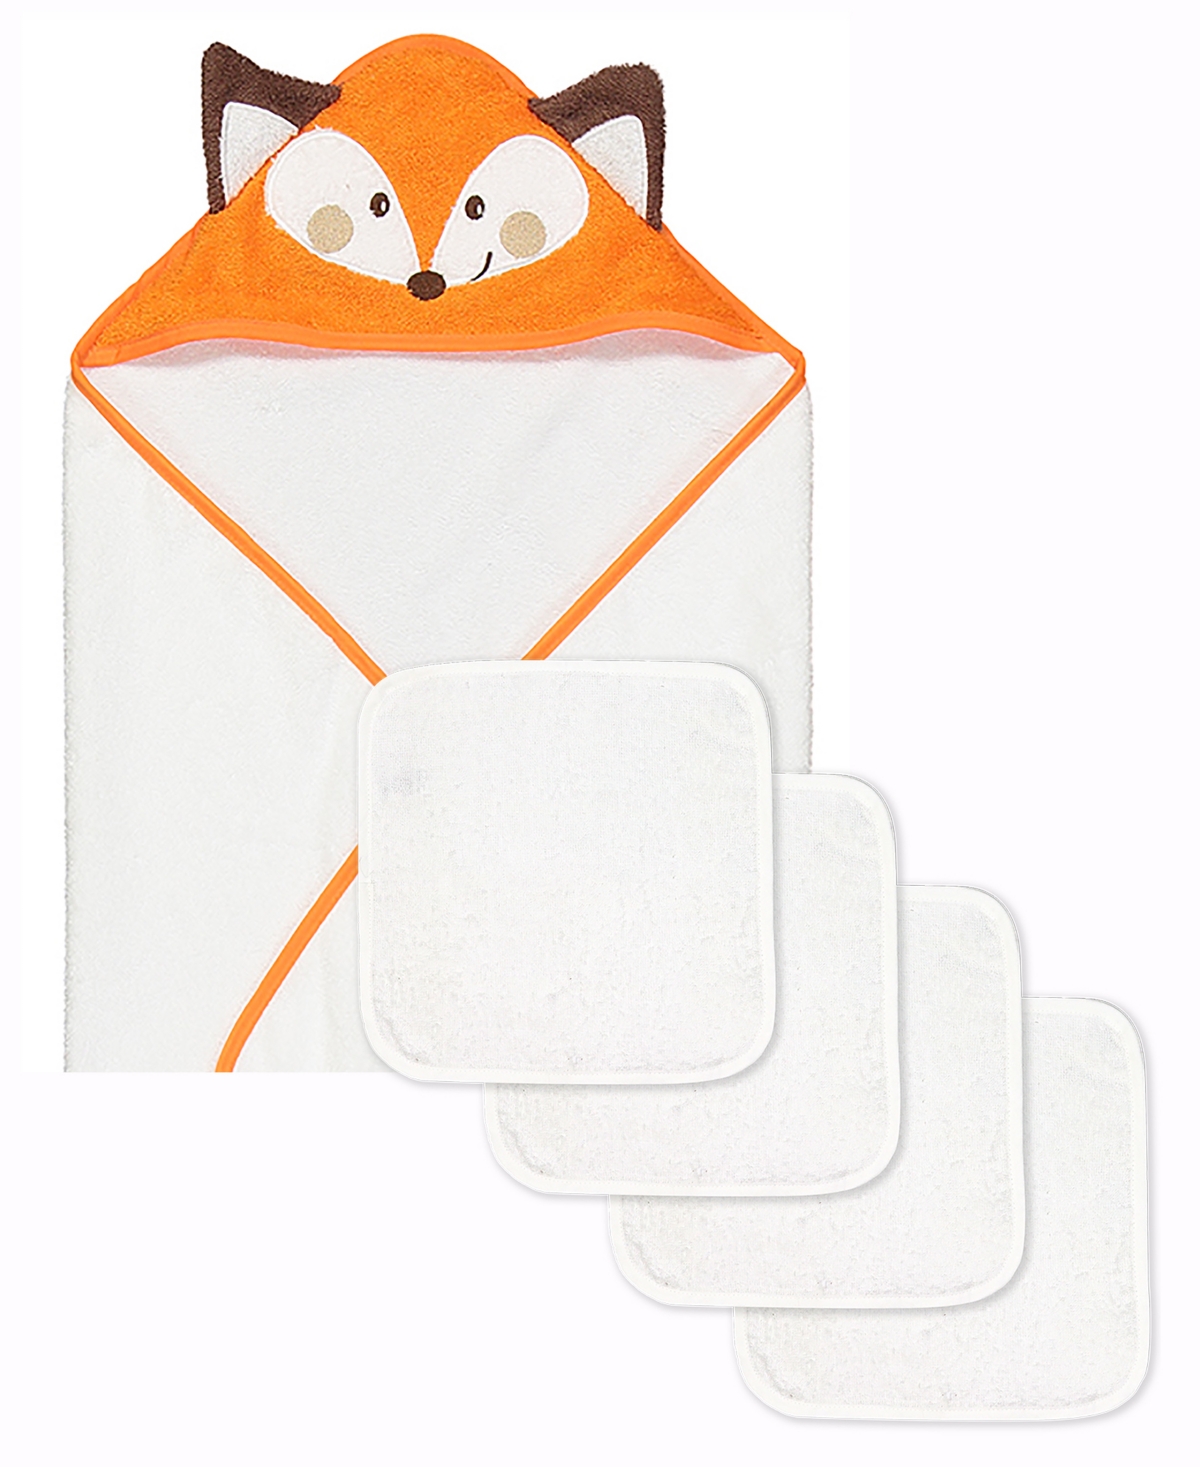 Baby Mode Jesse & Lulu Baby Boys Or Baby Girls Character Bath Towel And Wash Cloth, 5 Piece Set In Orange